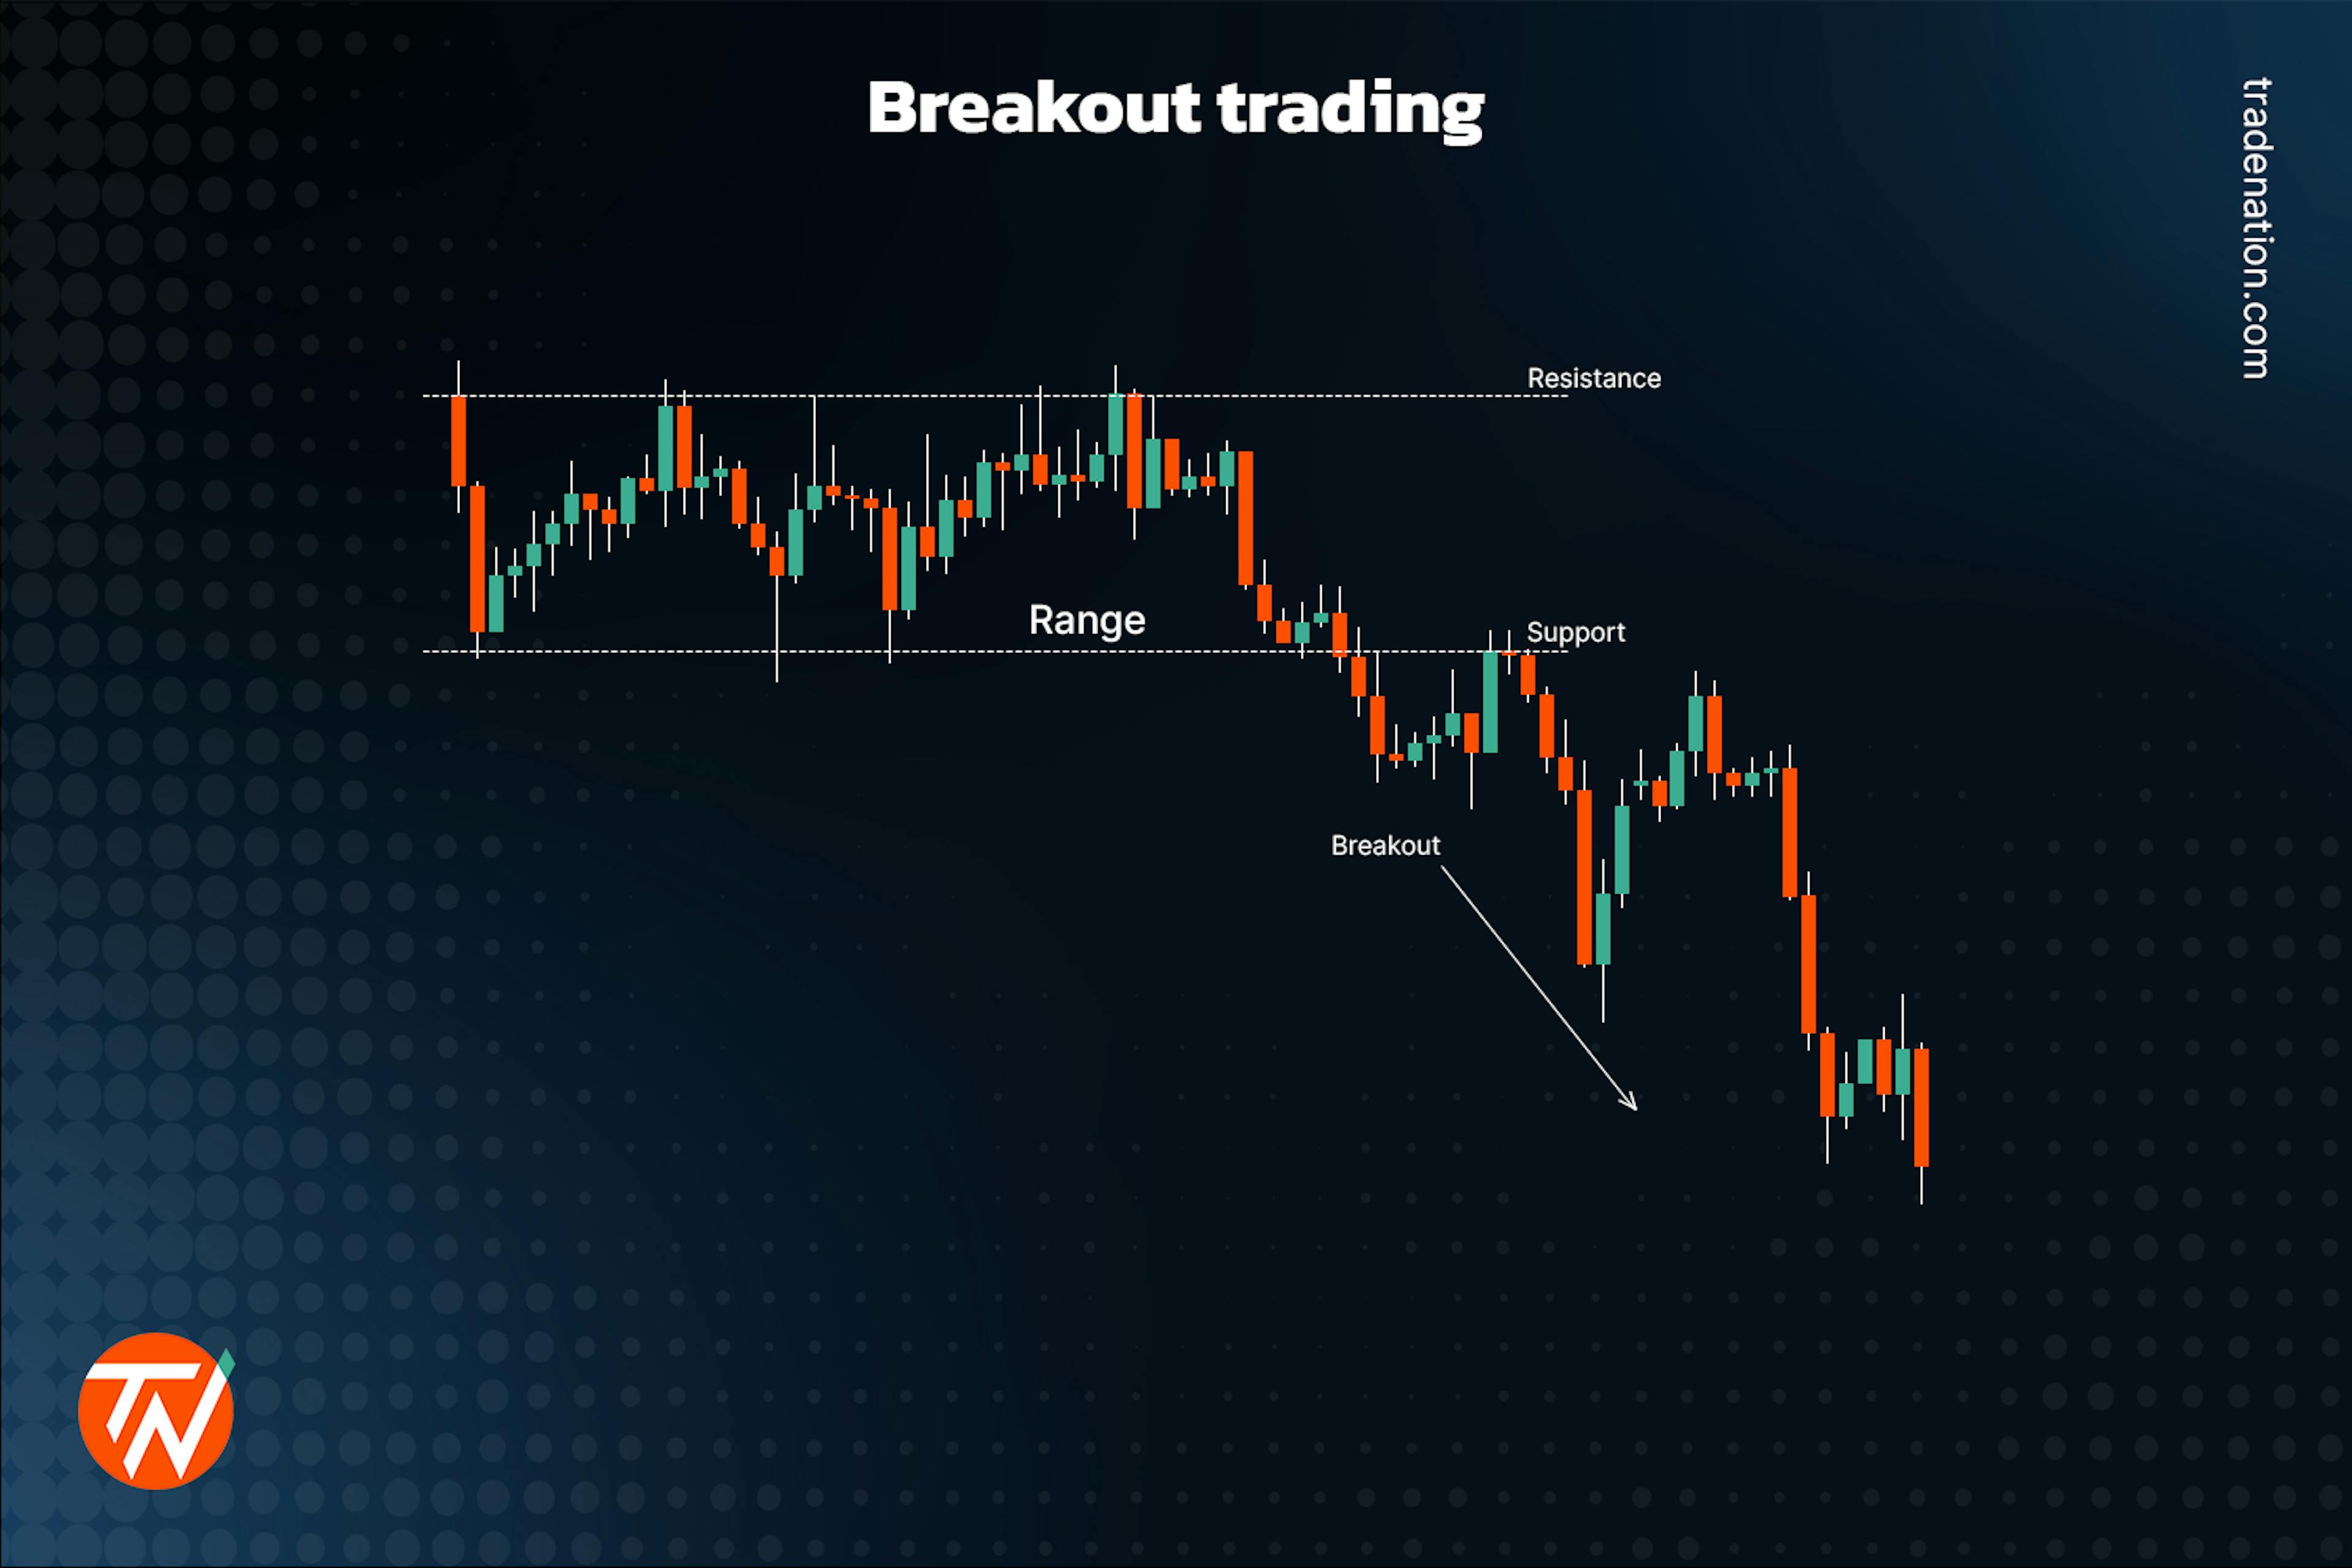 Breakout trading explained